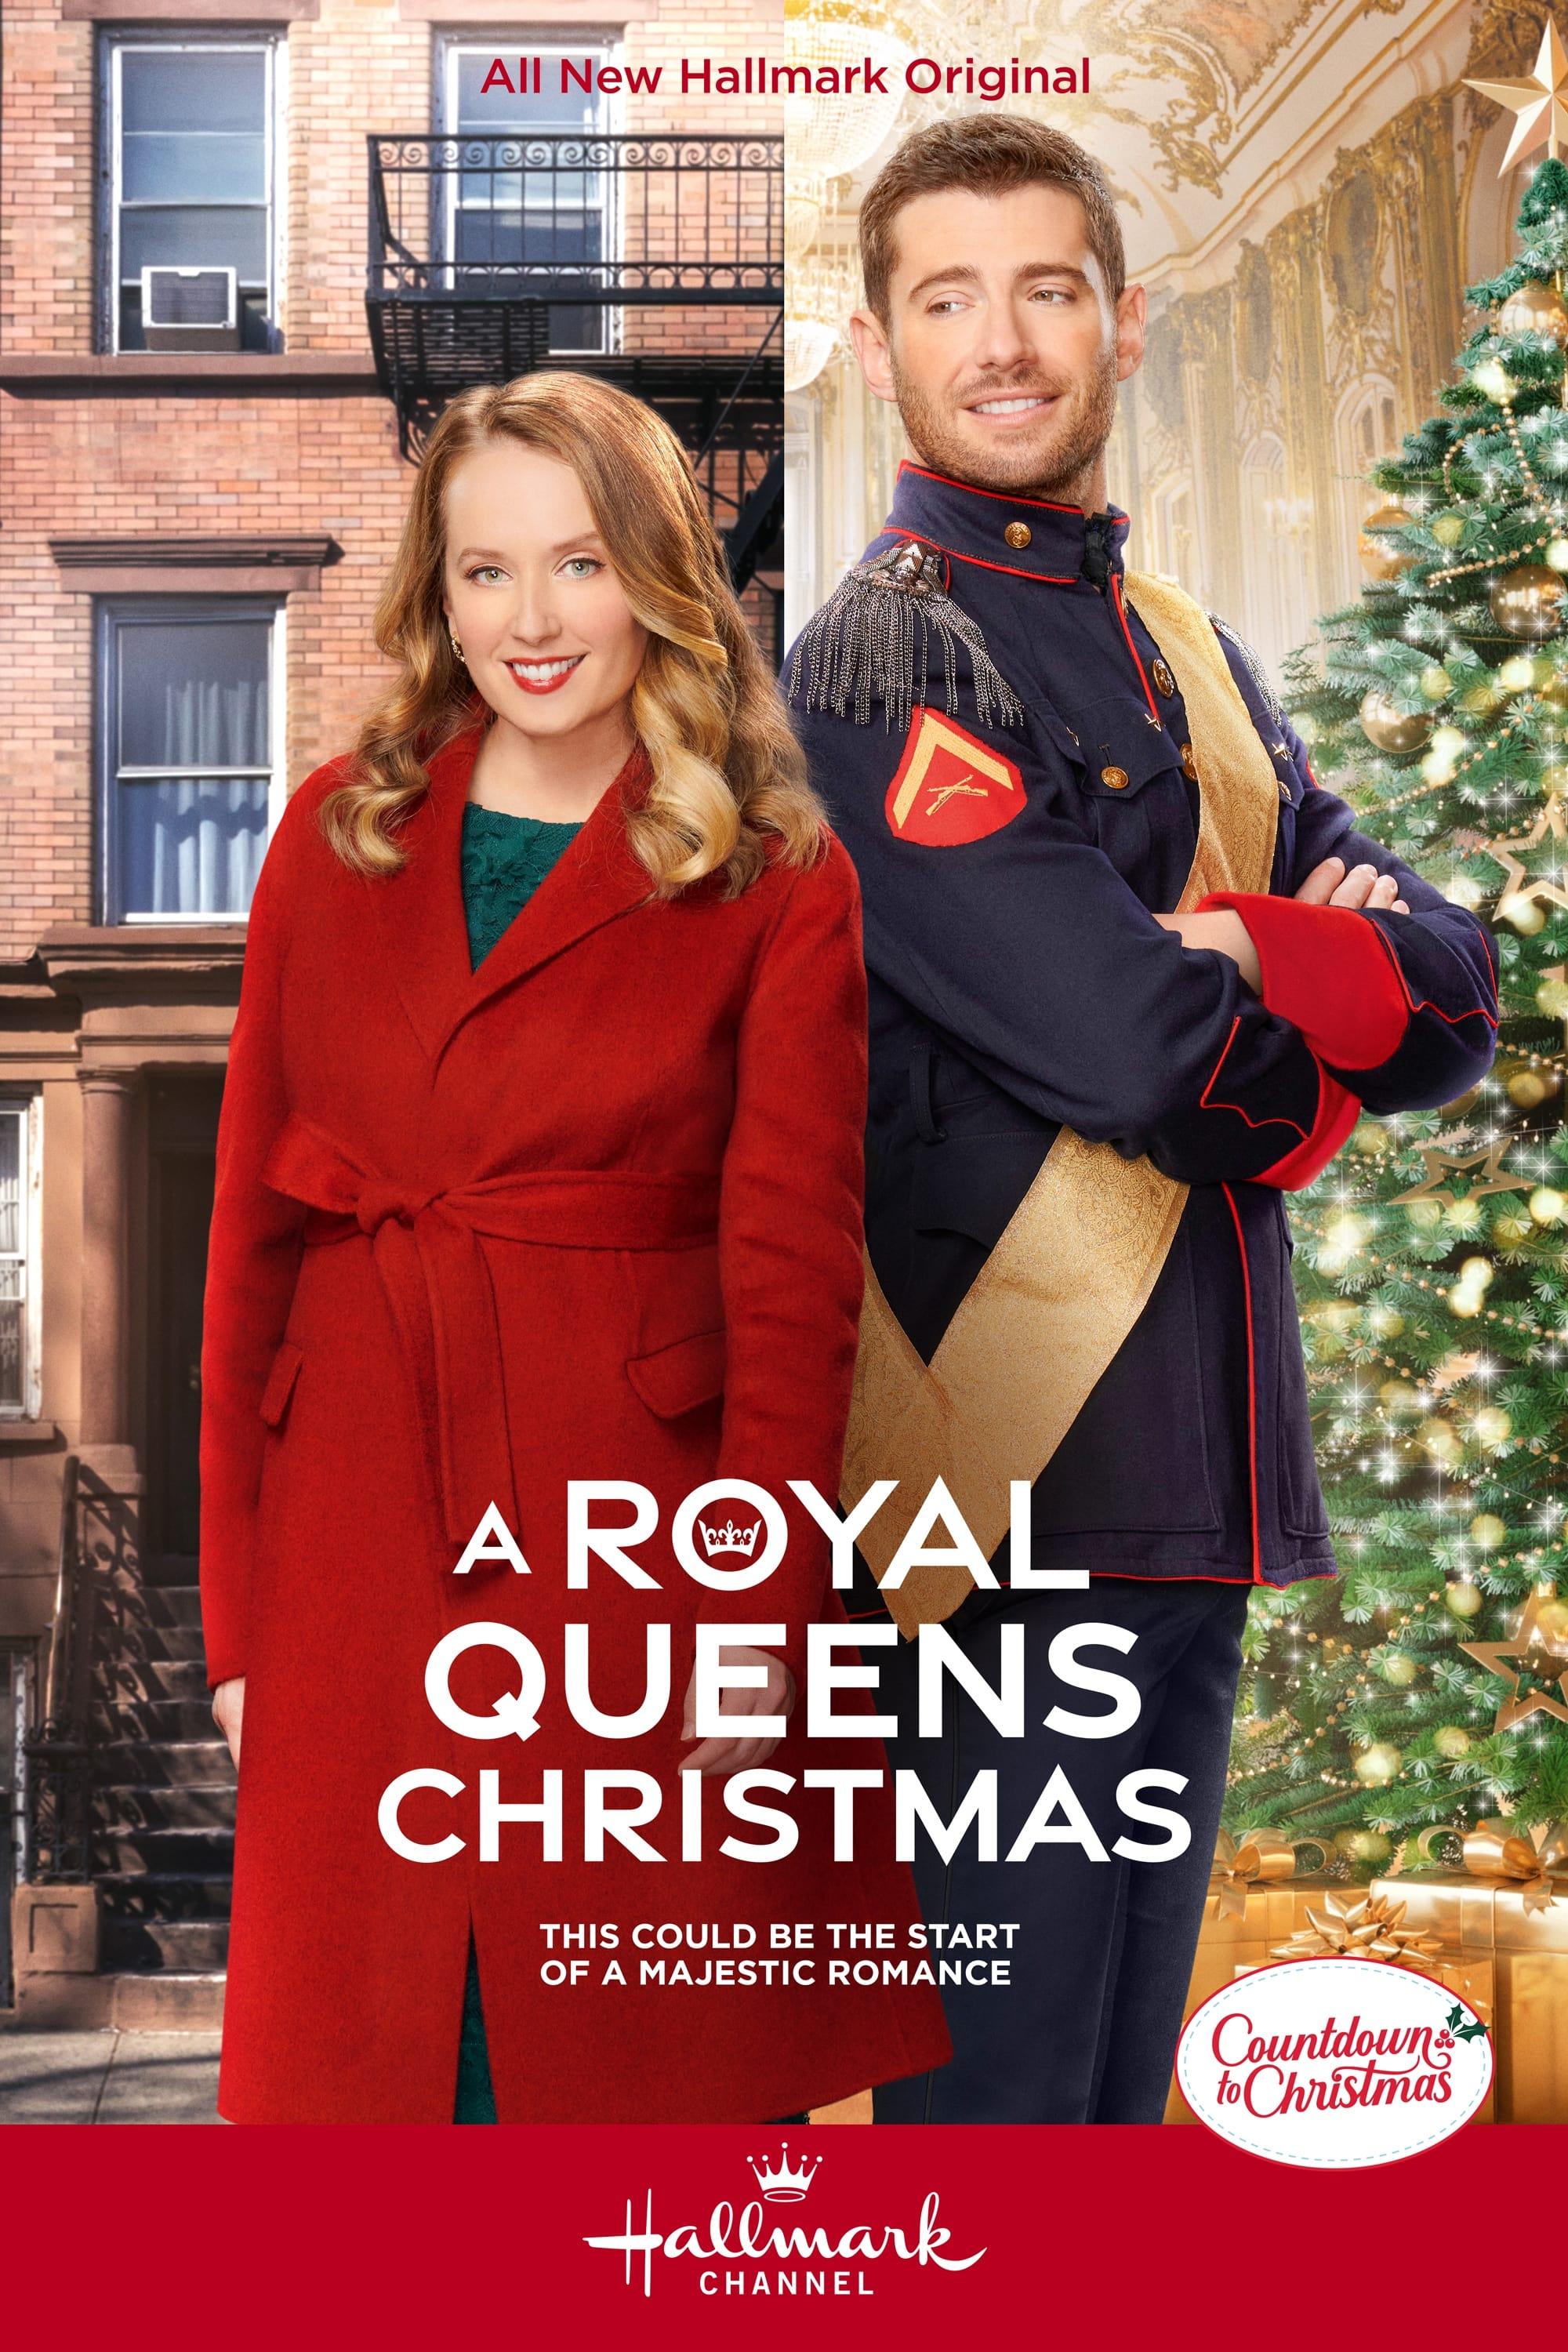 A Royal Queens Christmas poster